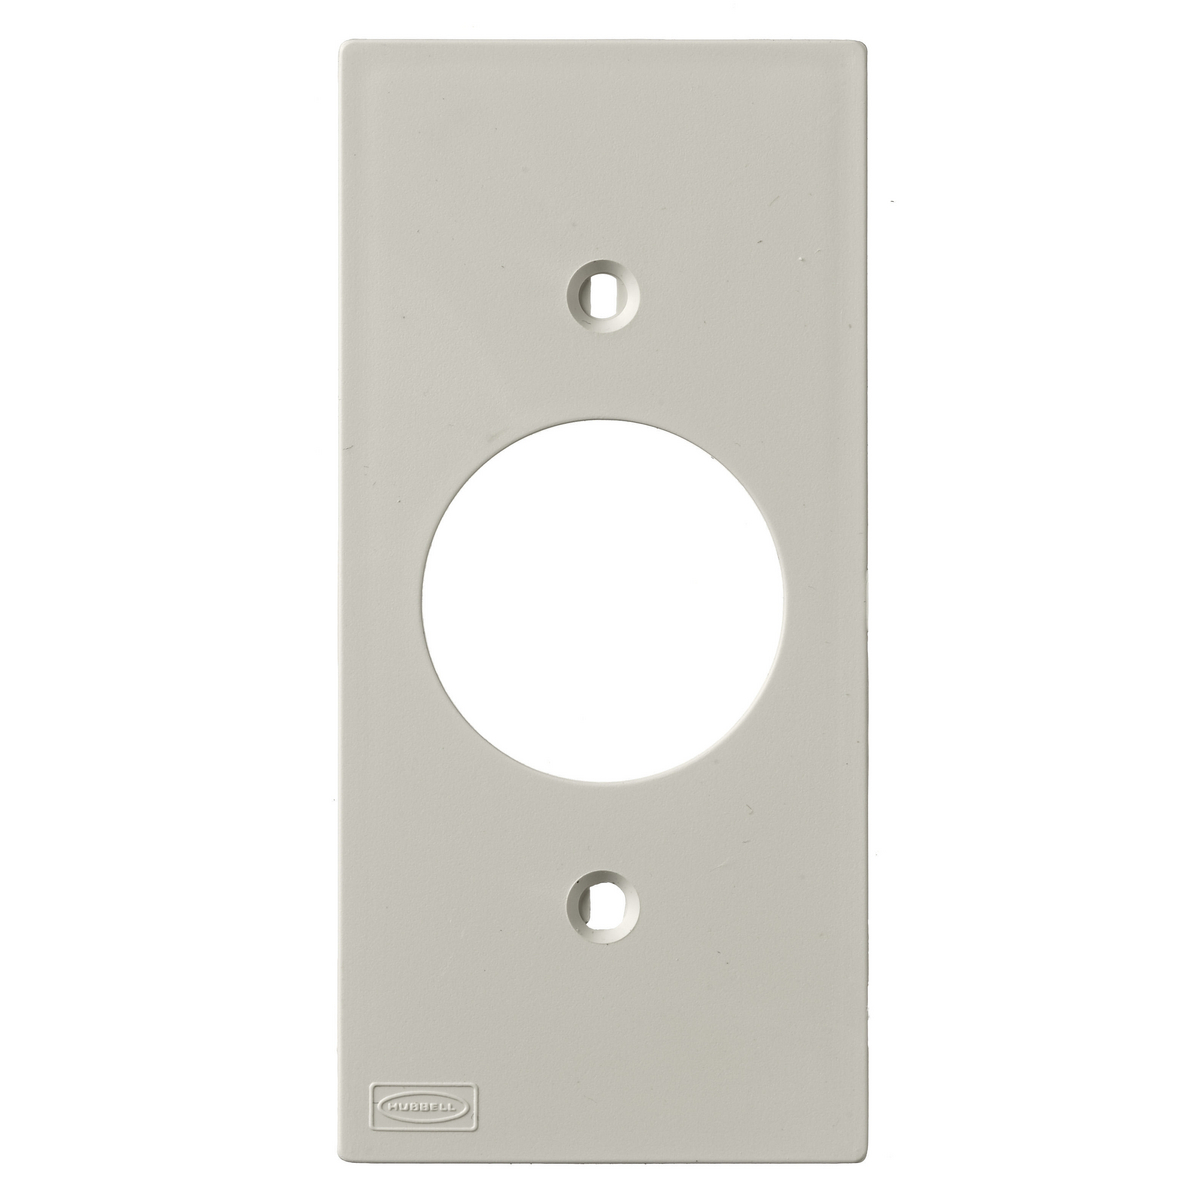 Device and Accessories, Faceplate, KP Series 1-Gang, Opening, Office White | KP7 | Wiring Device - Kellems